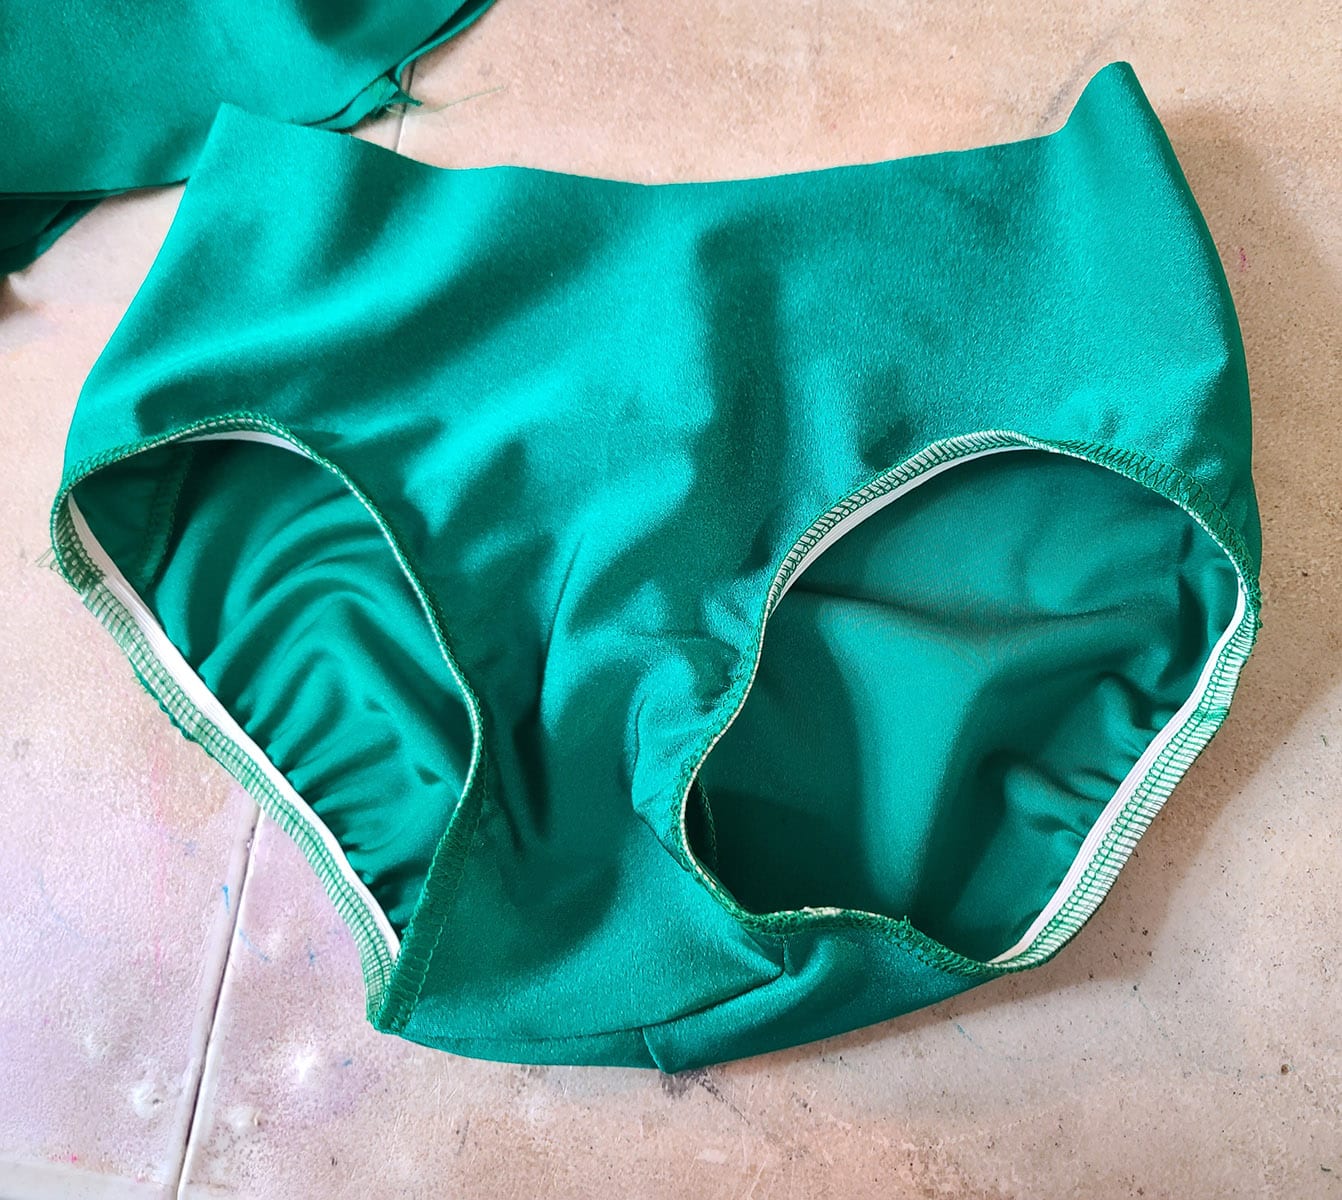 A green swimsuit bottom with elastic sewn into the leg holes.